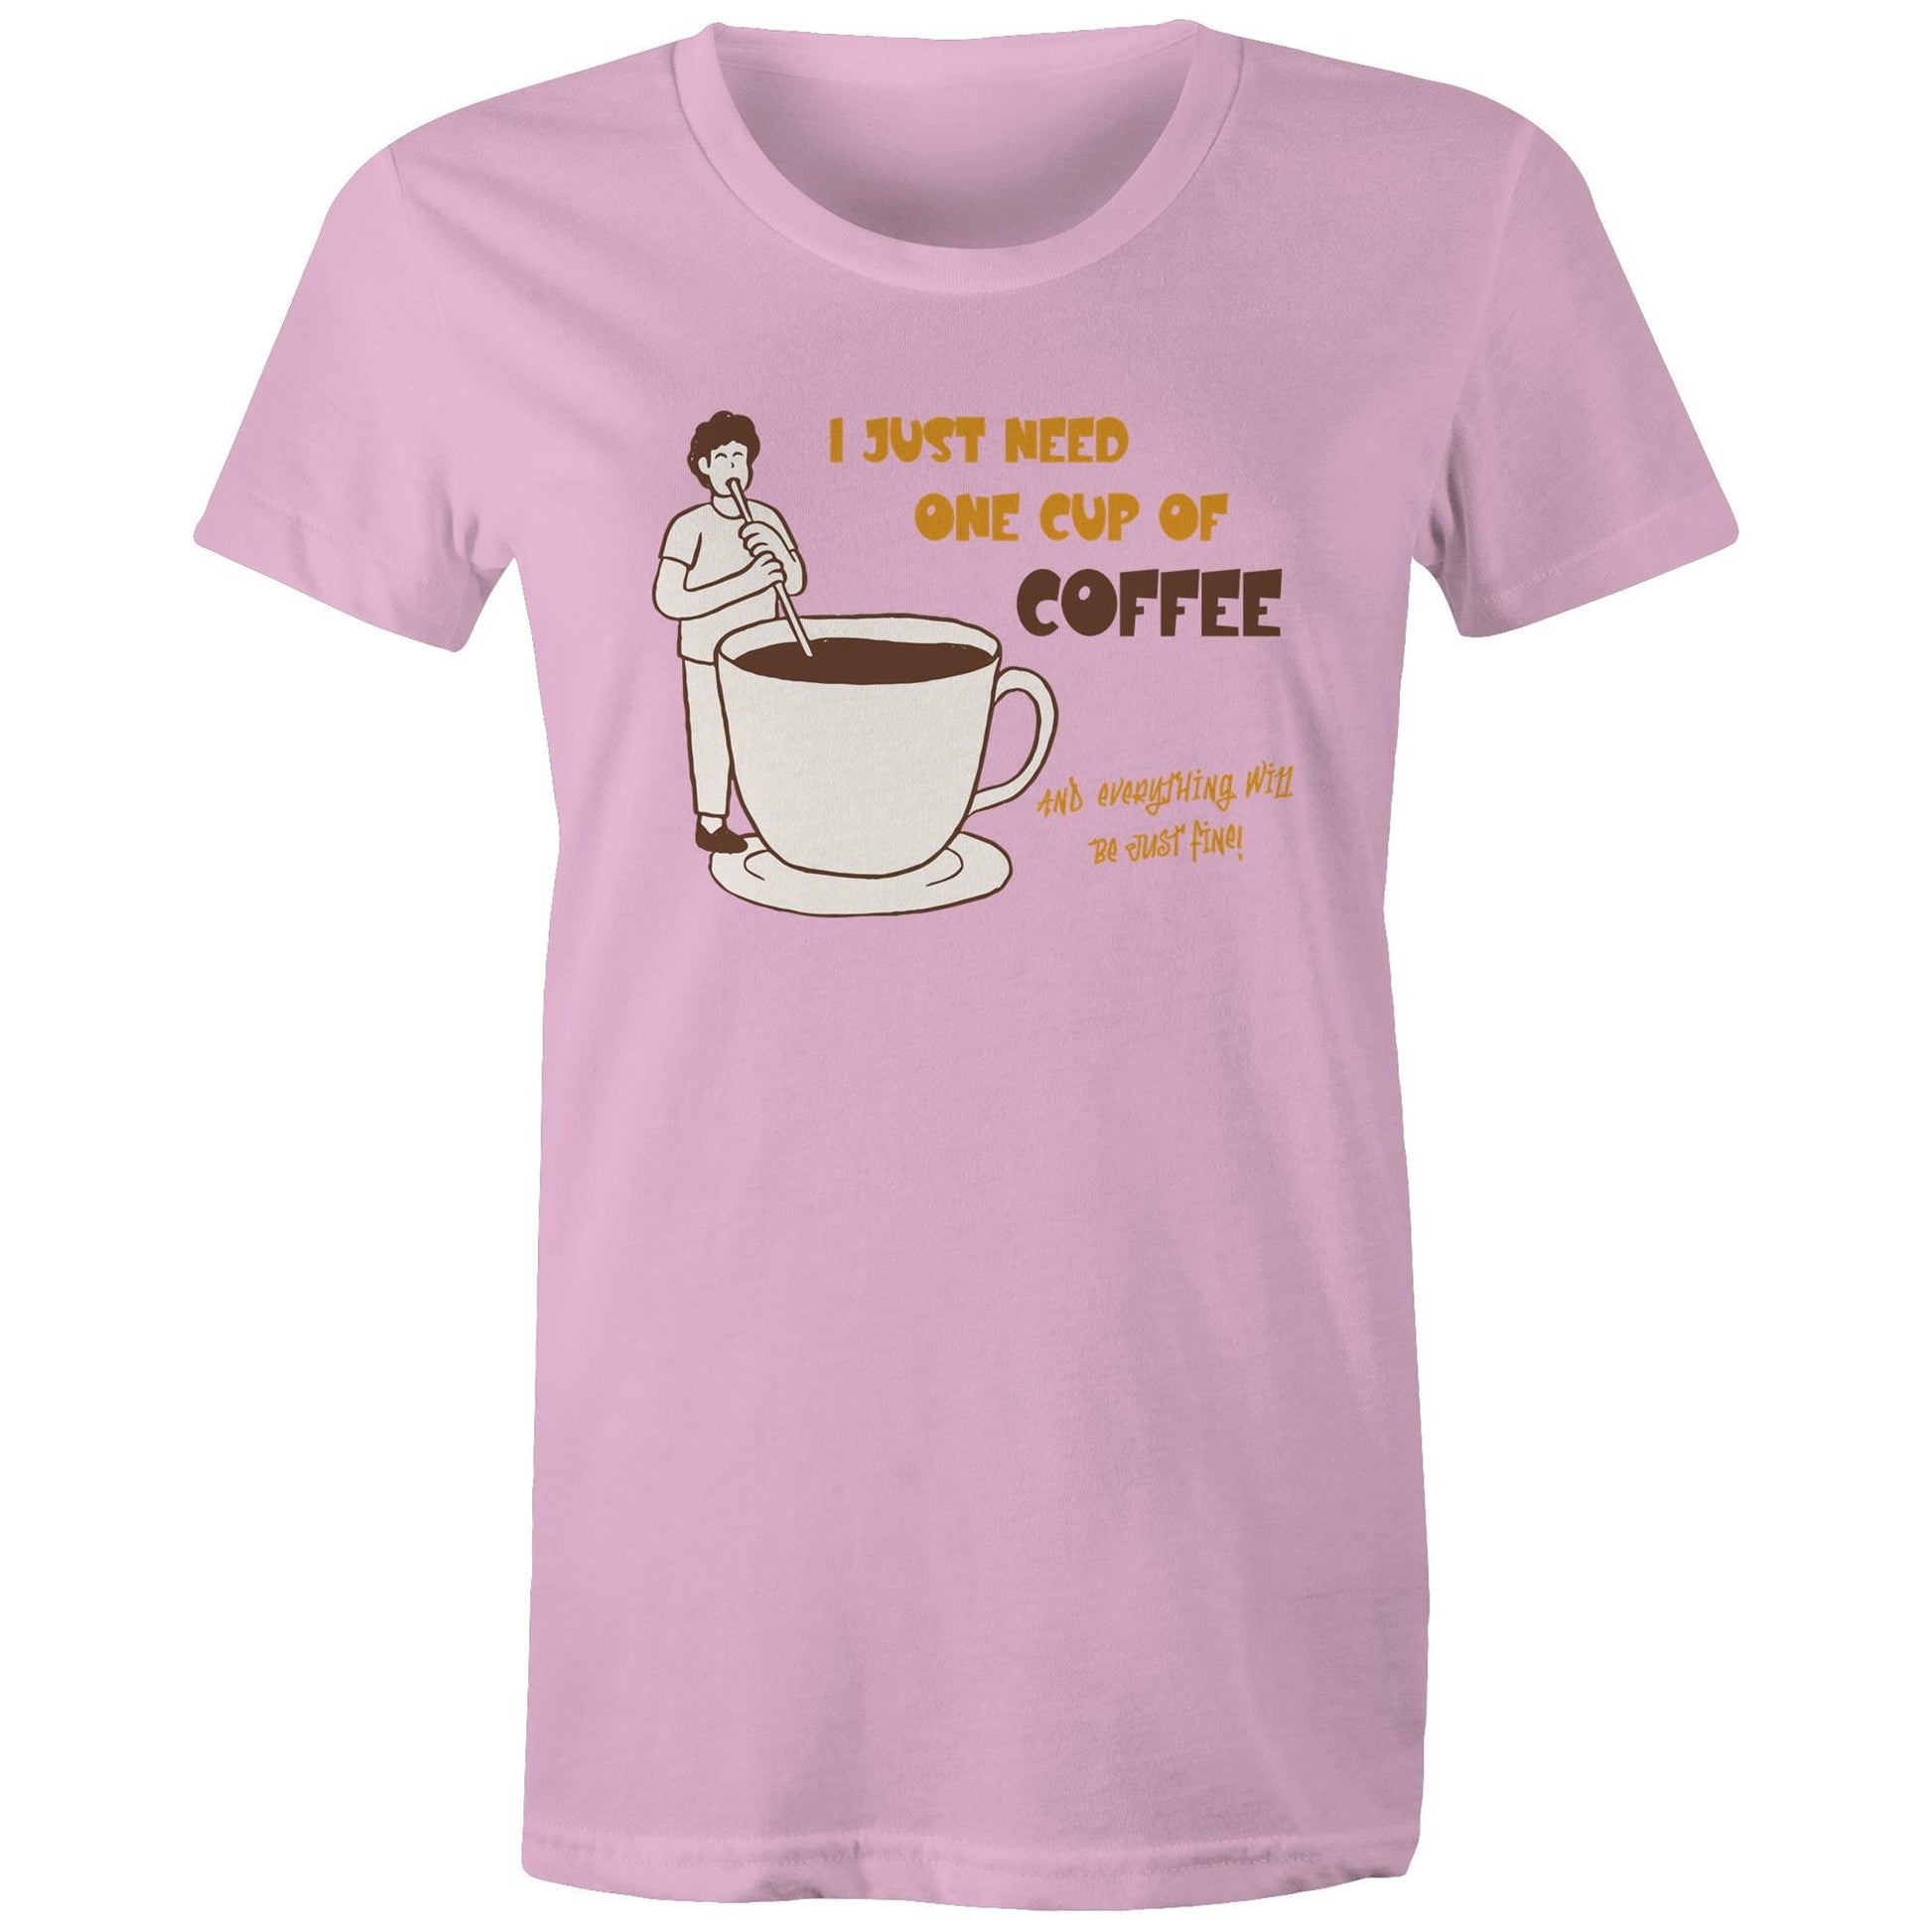 I Just Need One Cup Of Coffee And Everything Will Be Just Fine - Womens T-shirt Pink Womens T-shirt Coffee